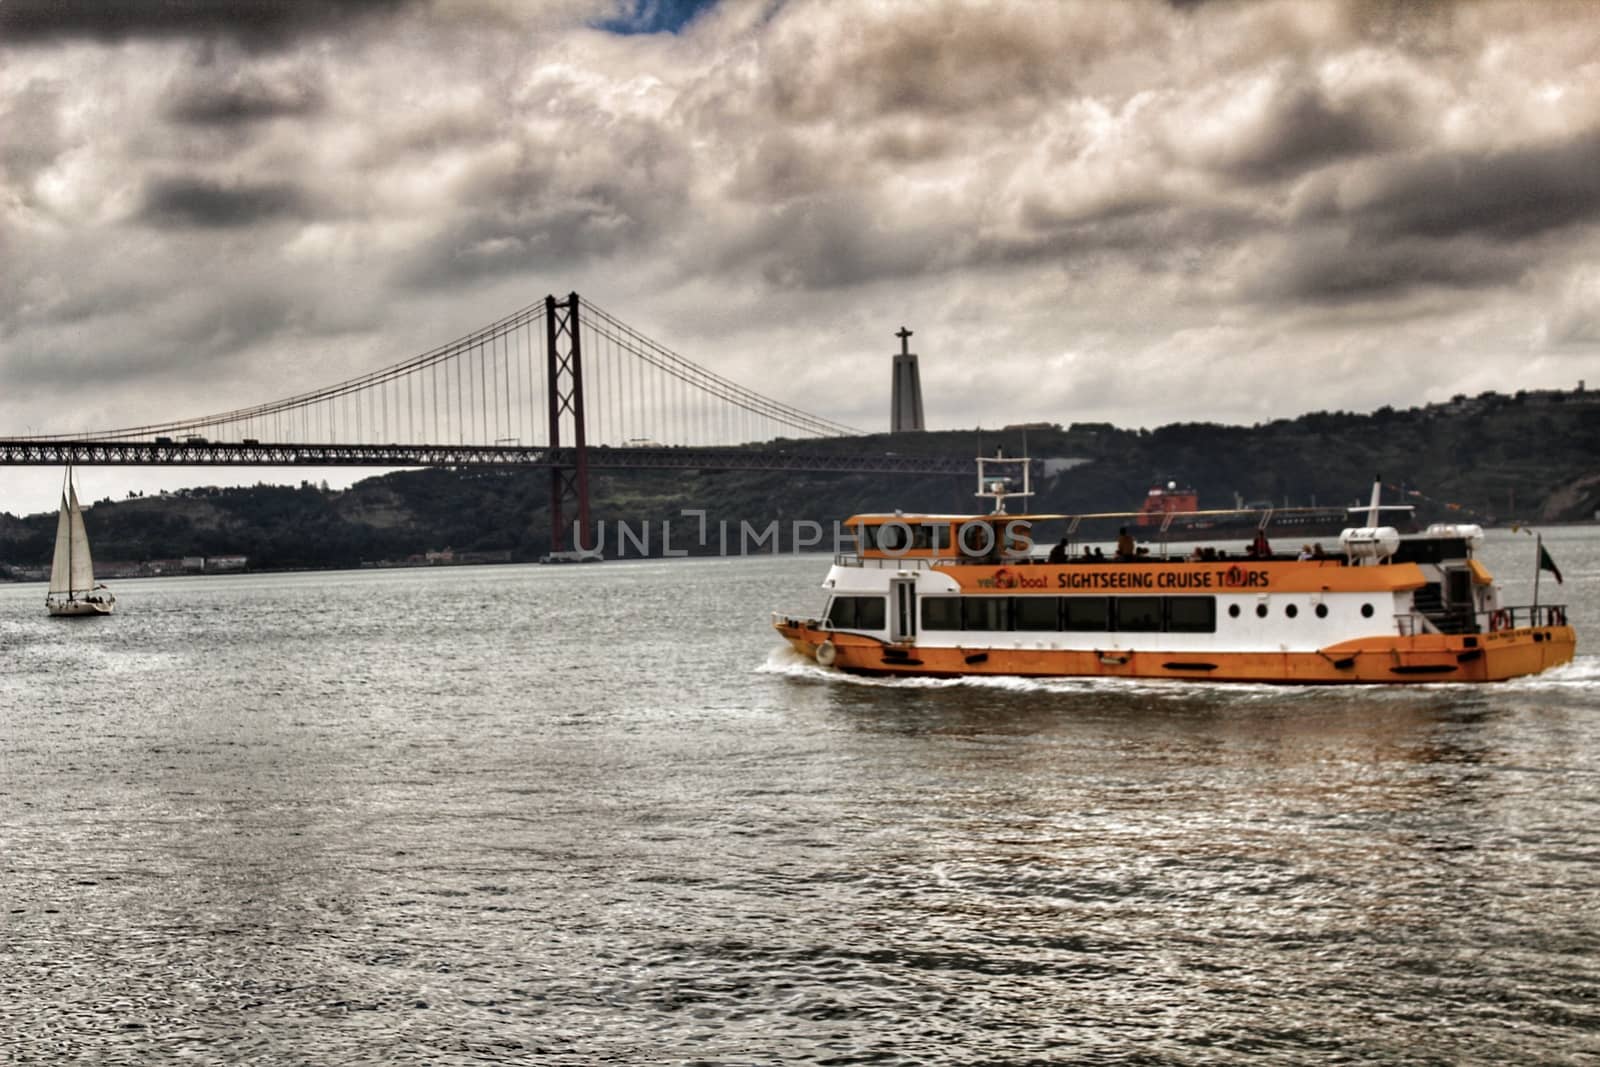 Lisbon, Portugal- June 3, 2018: Passengers boat Sailing along the Tagus river in Lisbon in the afternoon on a cloudy day.